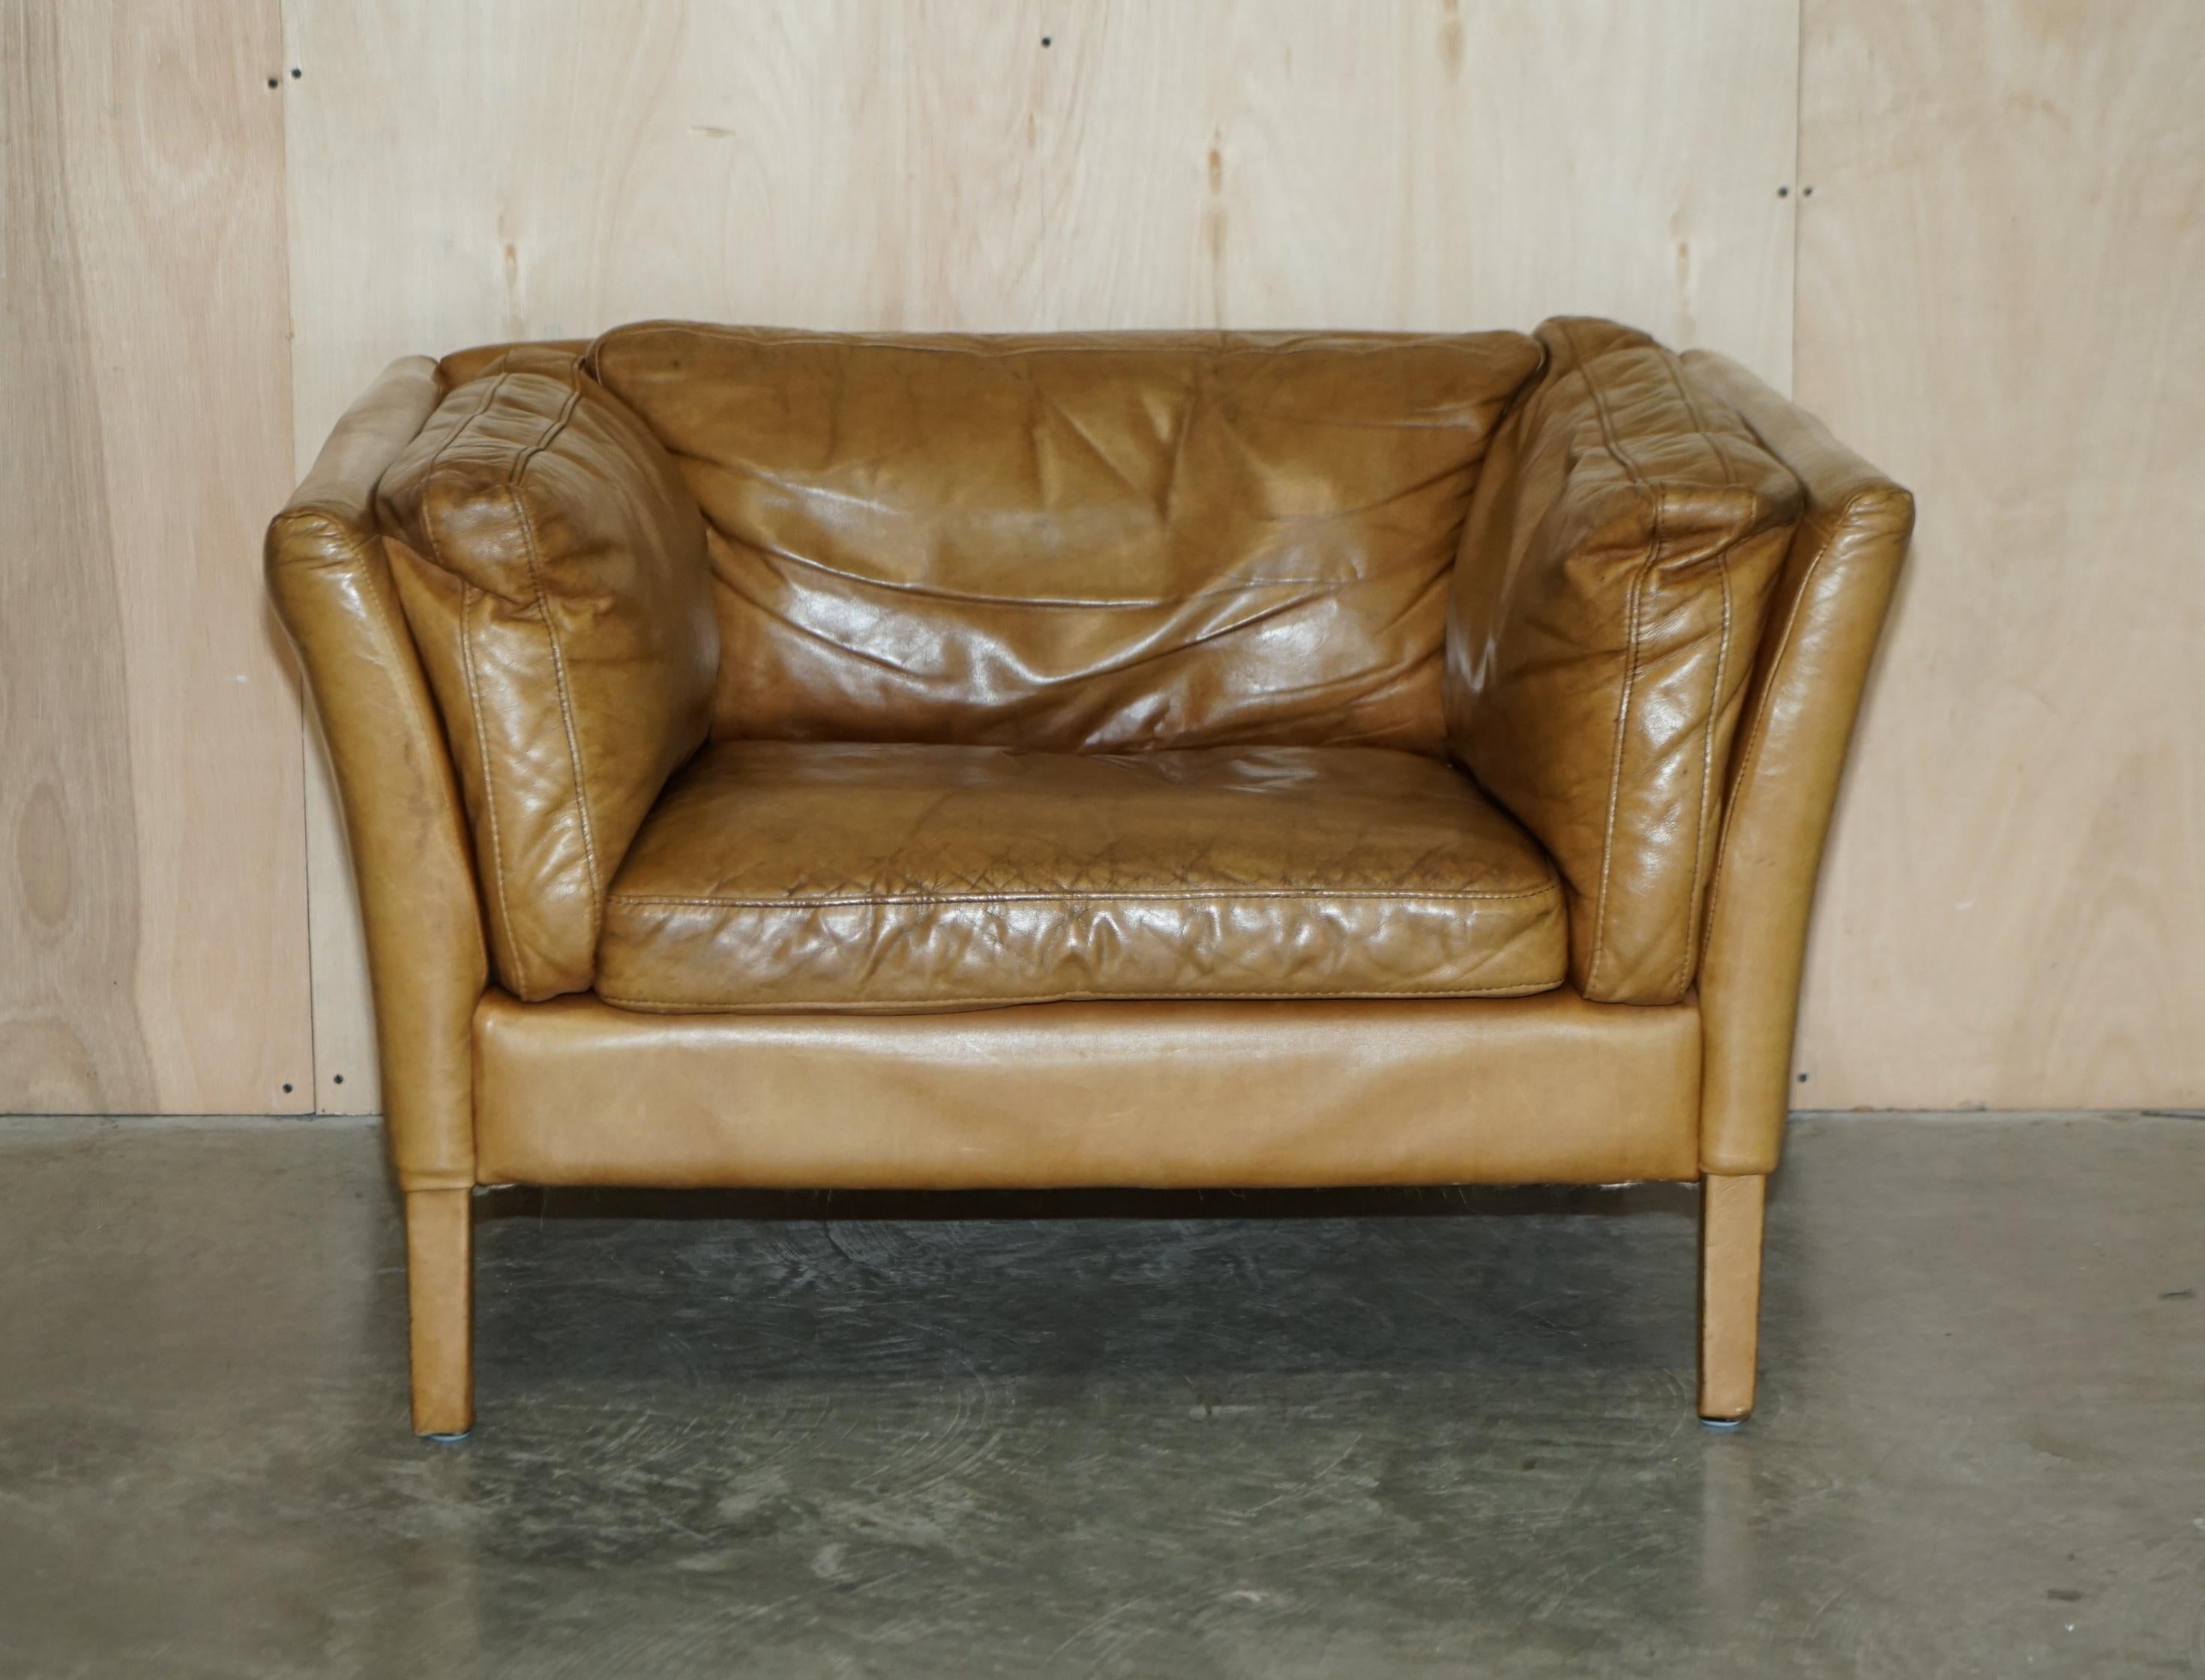 We are delighted to offer for sale this lovely, super comfortable, tan brown leather, Halo Groucho love seat armchair 

A very good looking well made piece, I personally have owed the sofa version of this love seat for years and can attest that it